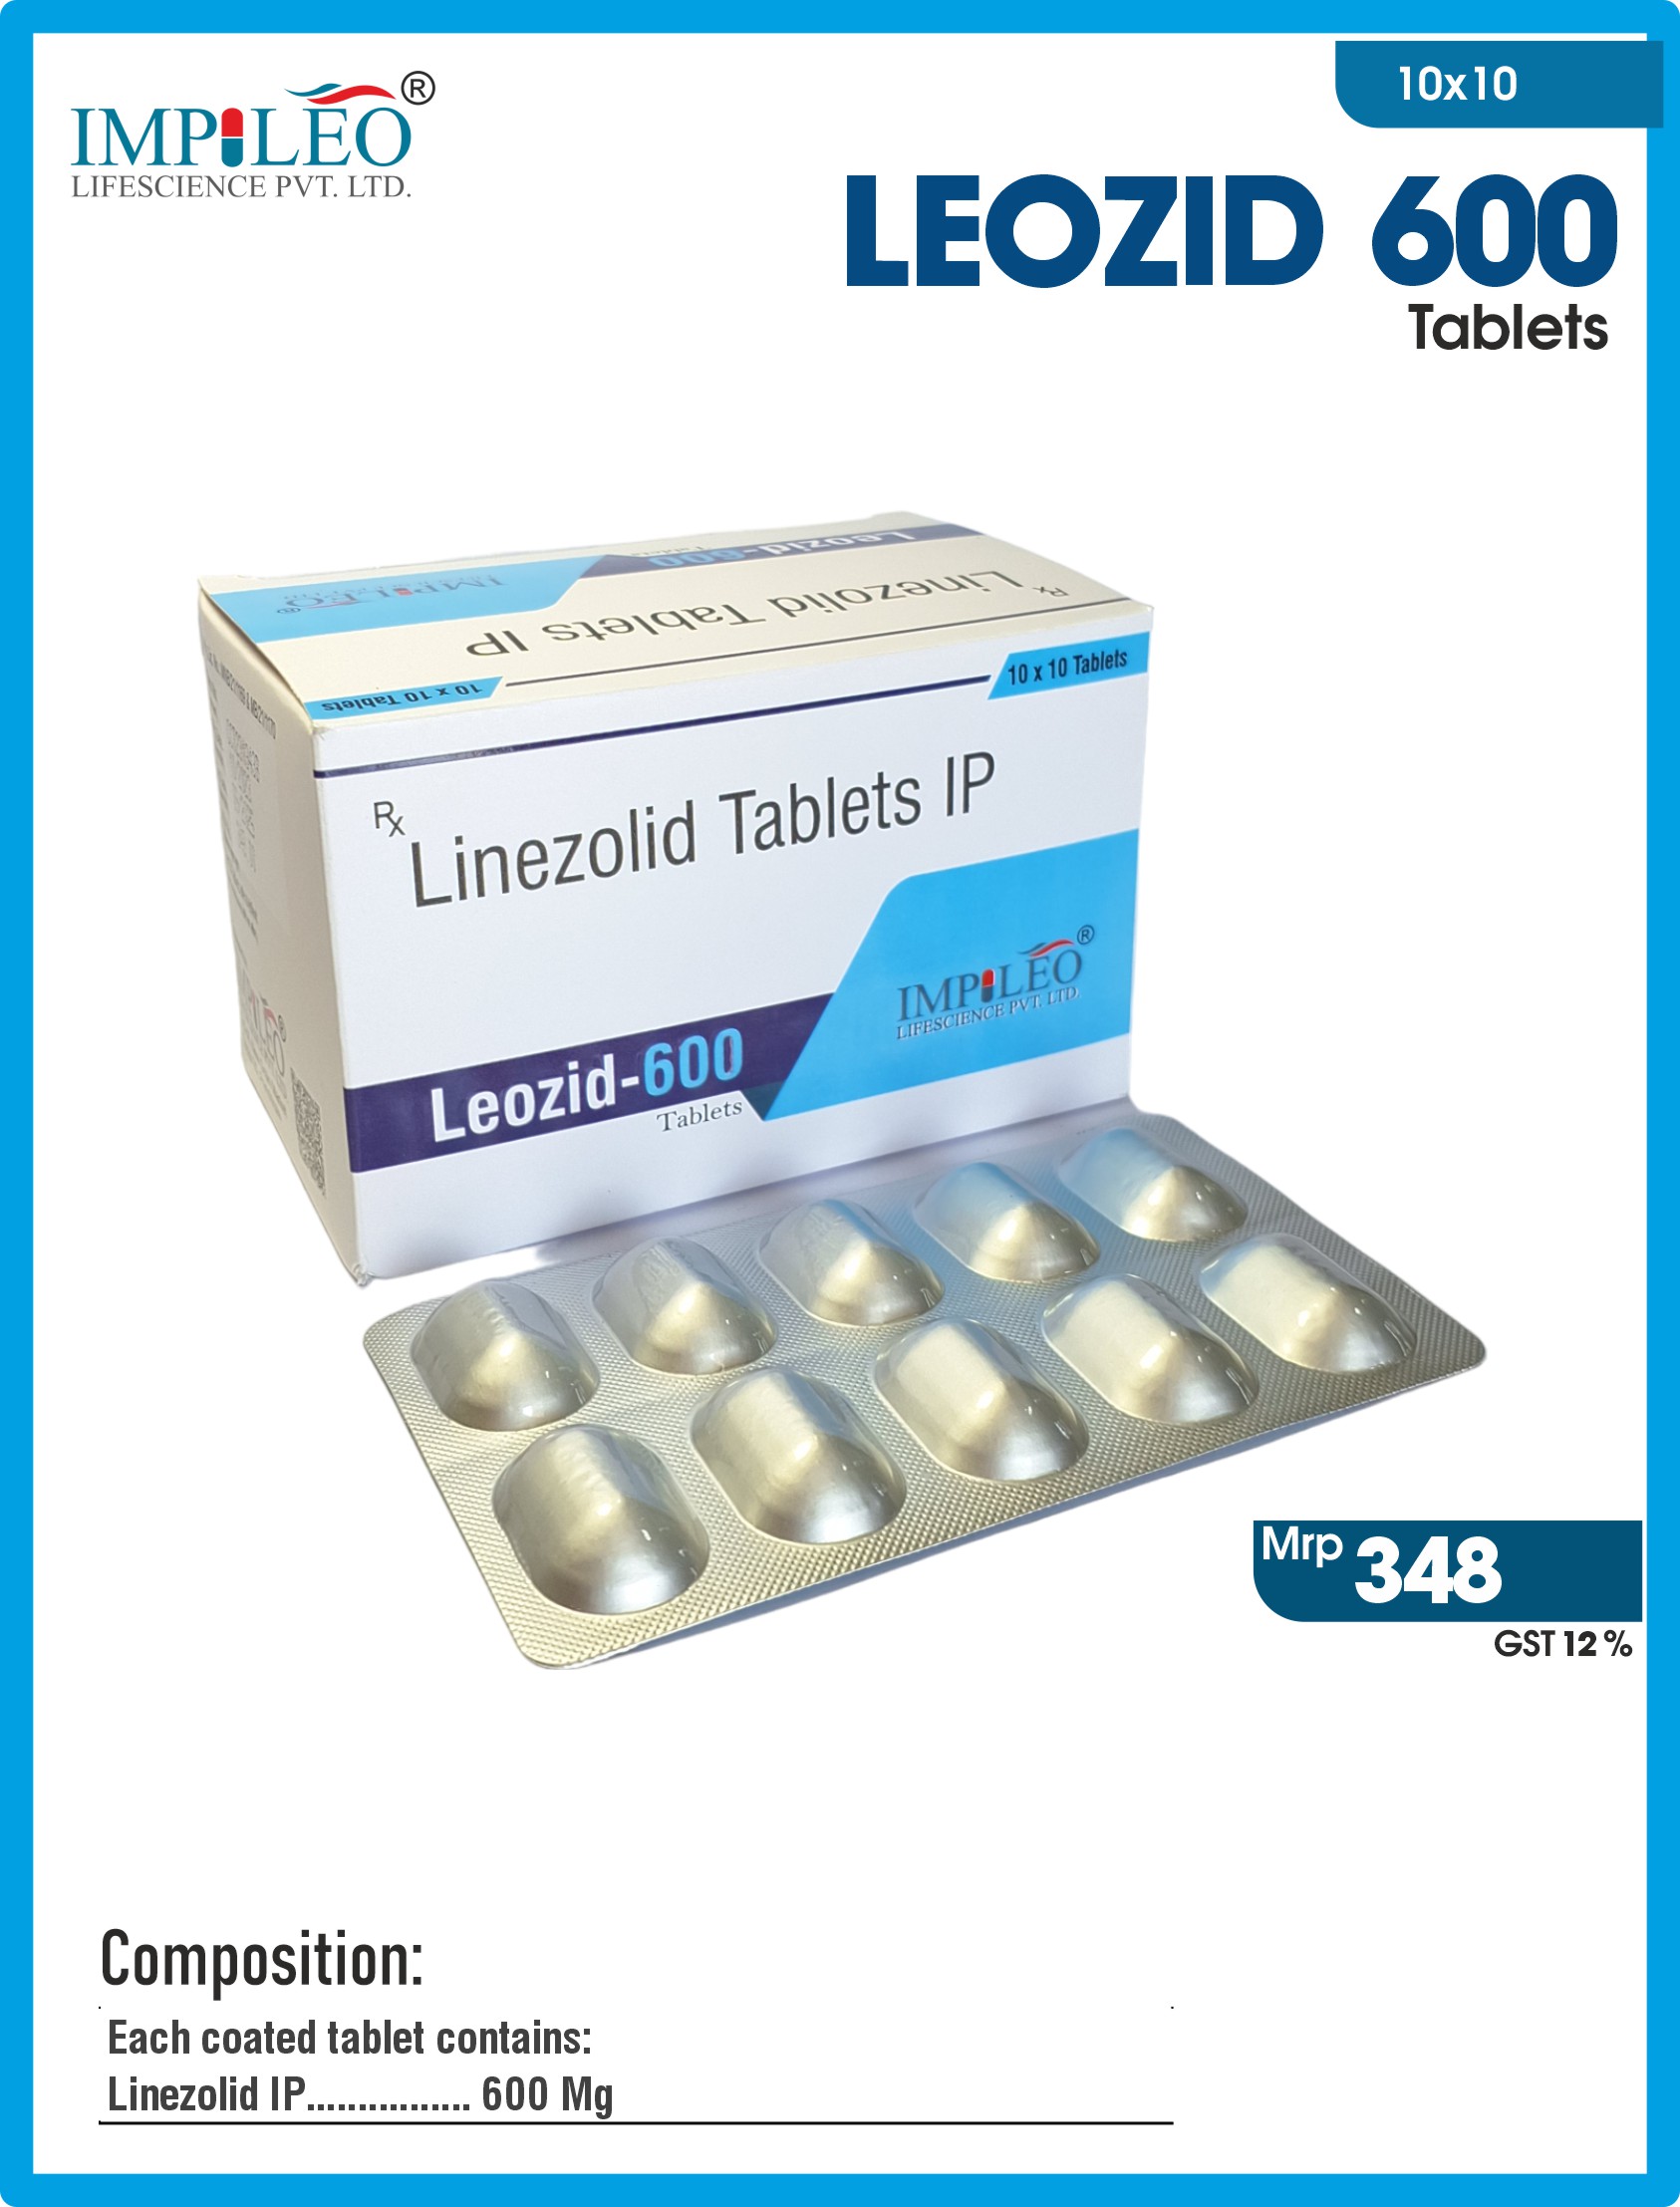 LEOZID 600 (Linezolid) Tablets from Trusted PCD Pharma Franchise in India